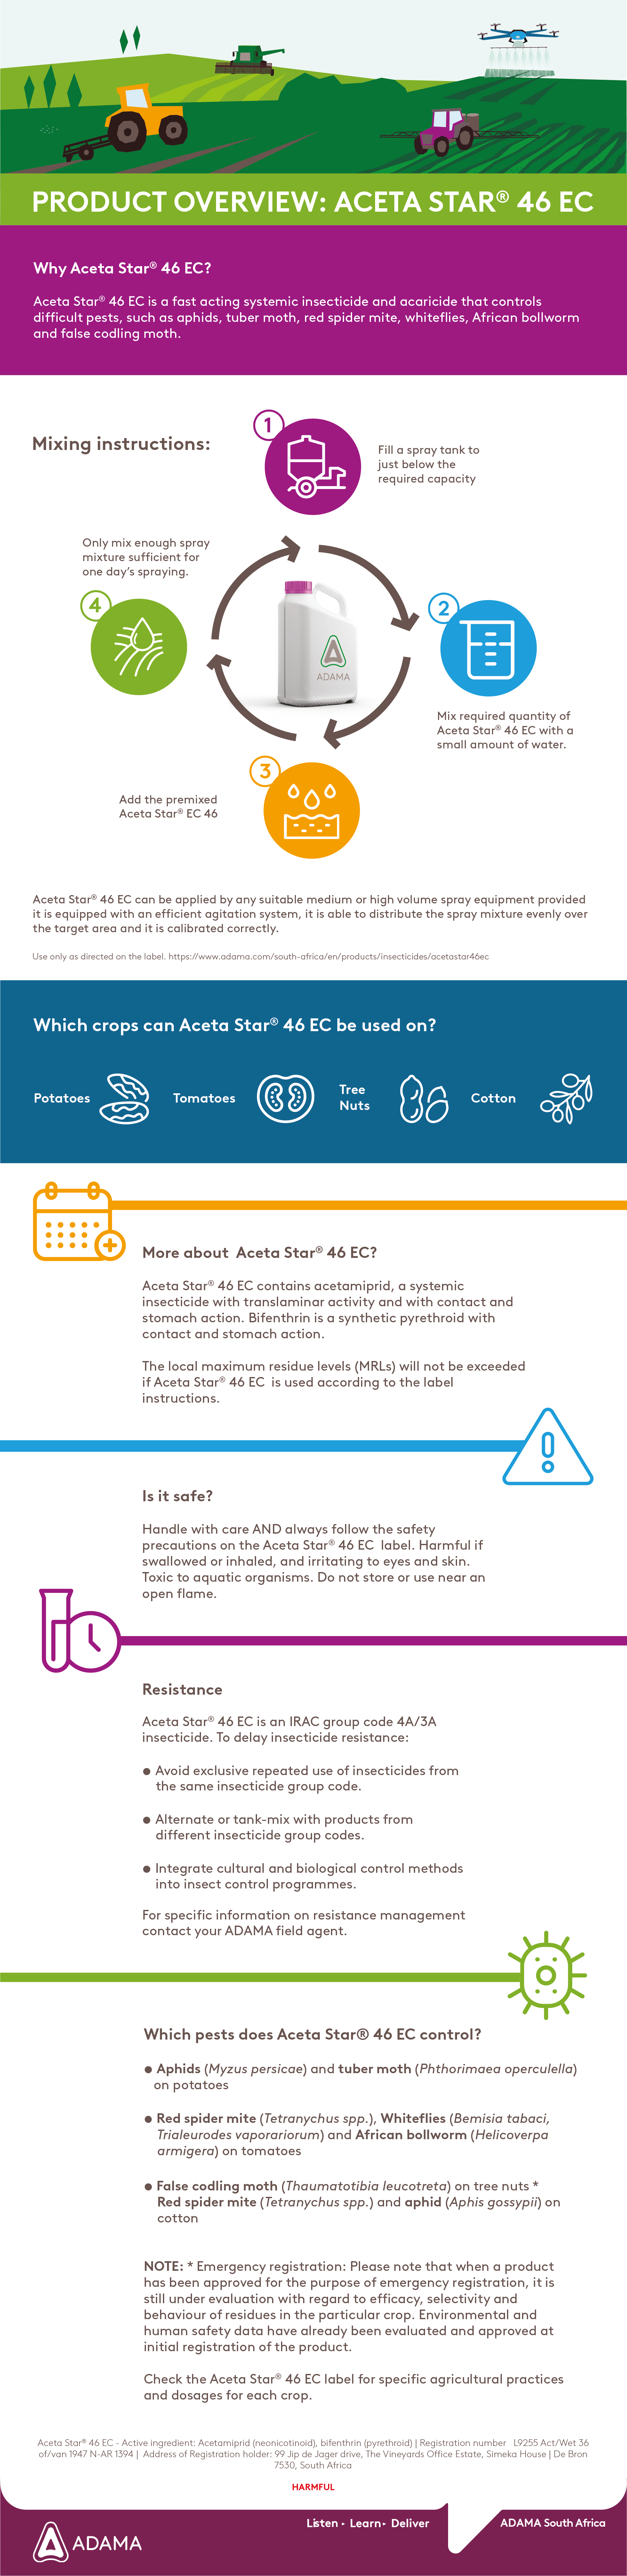 Aceta Star® 46 EC Insecticide Product Overview & Infographic